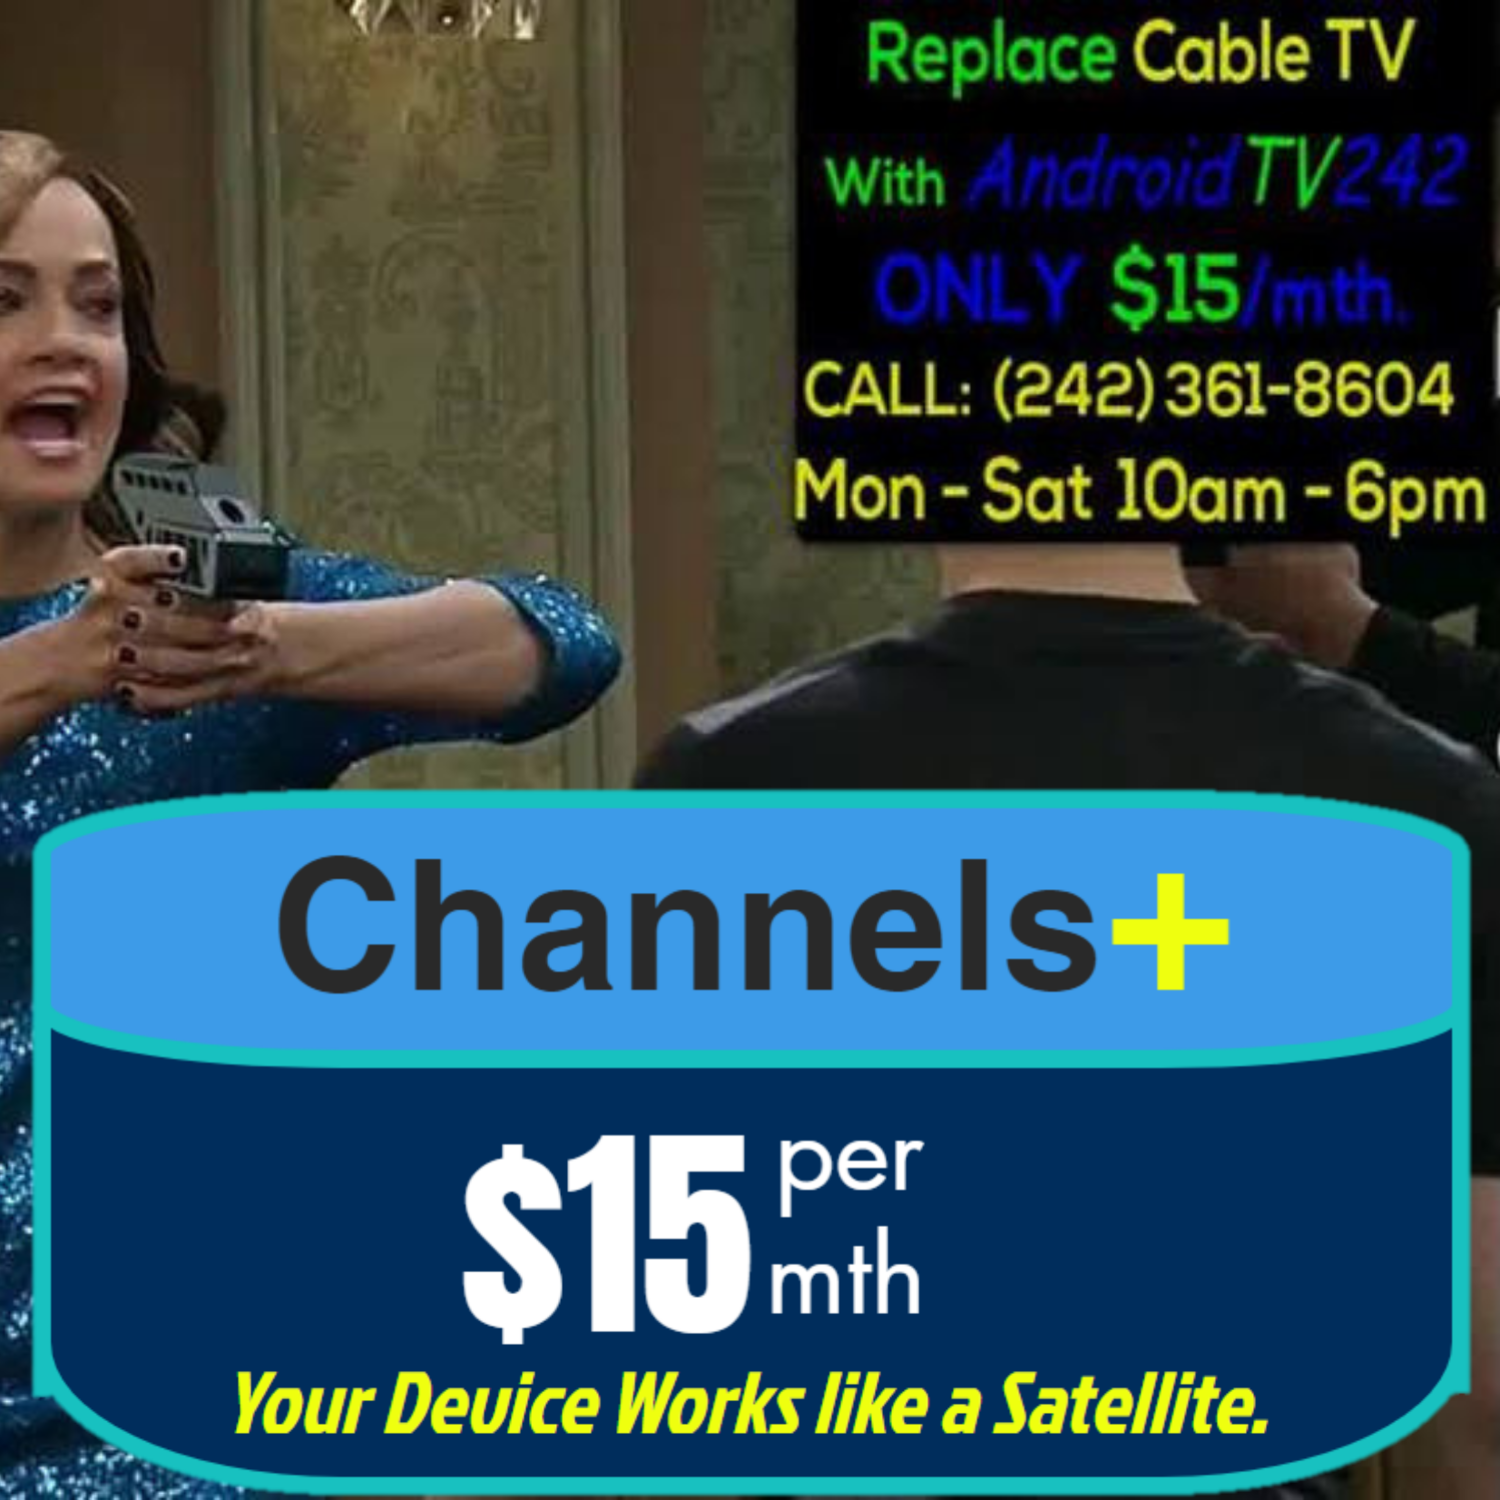 Channels+ (1 Month) IPTV Package - Over 5000 Channels, All Sports Packages, Movie Channels, etc.  (Miami Channels and Local Channels ZNS, Cable 12 Included.) FOR FIRE STICKS & ANDROID BOXES.